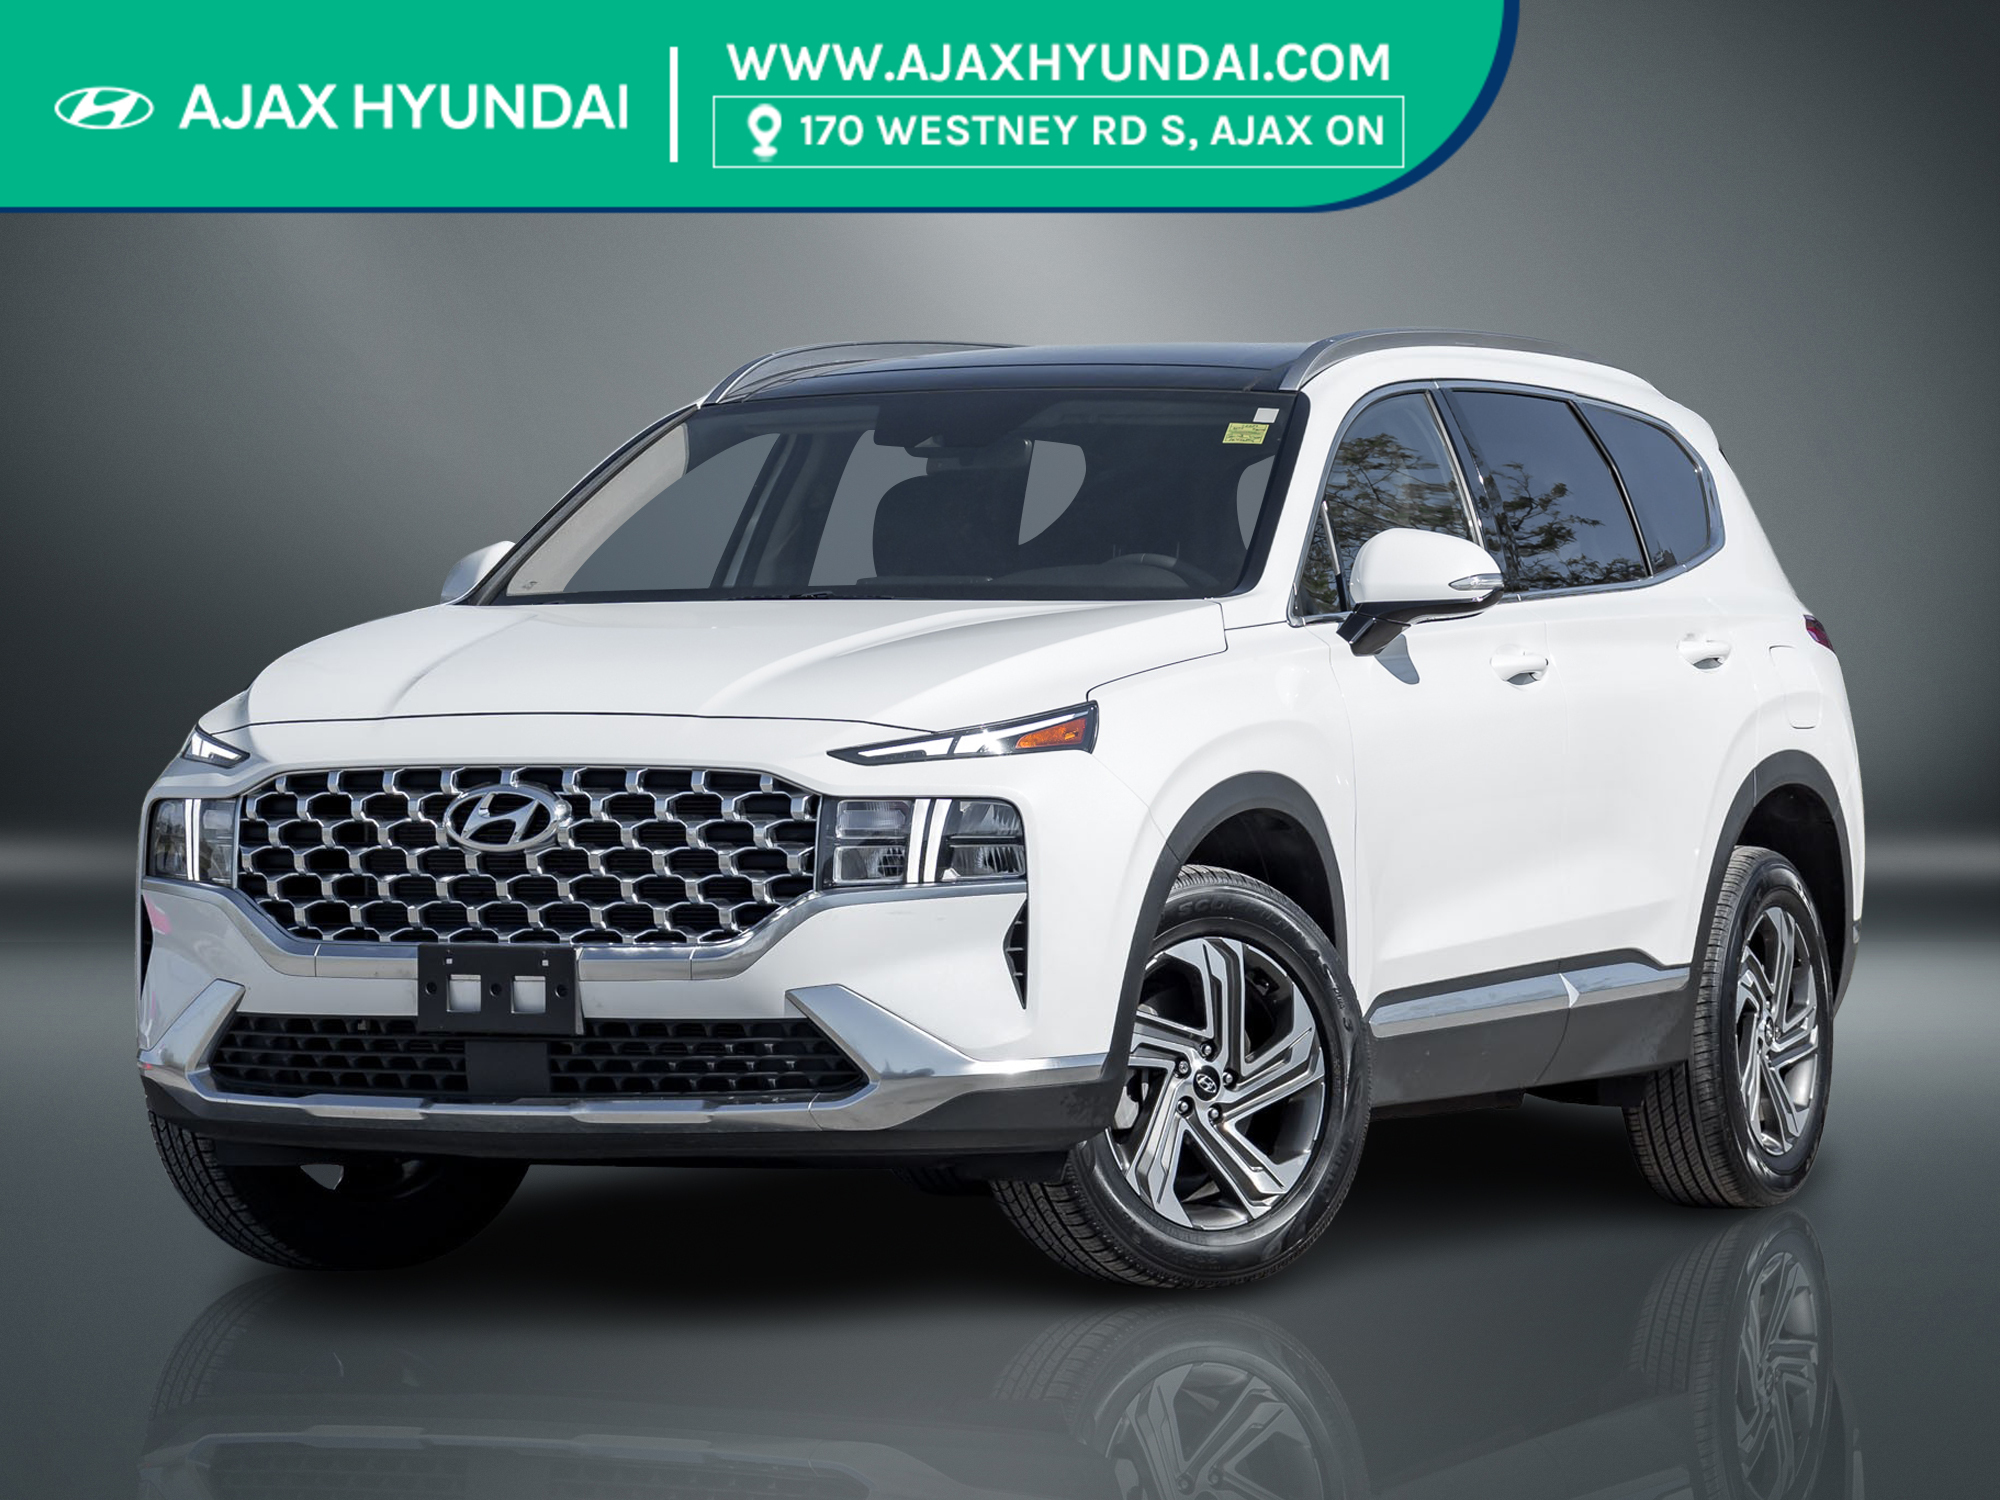 2022 Hyundai Santa Fe TREND | AWD RATES FROM 4.99% TREND | AWD RATES FRO